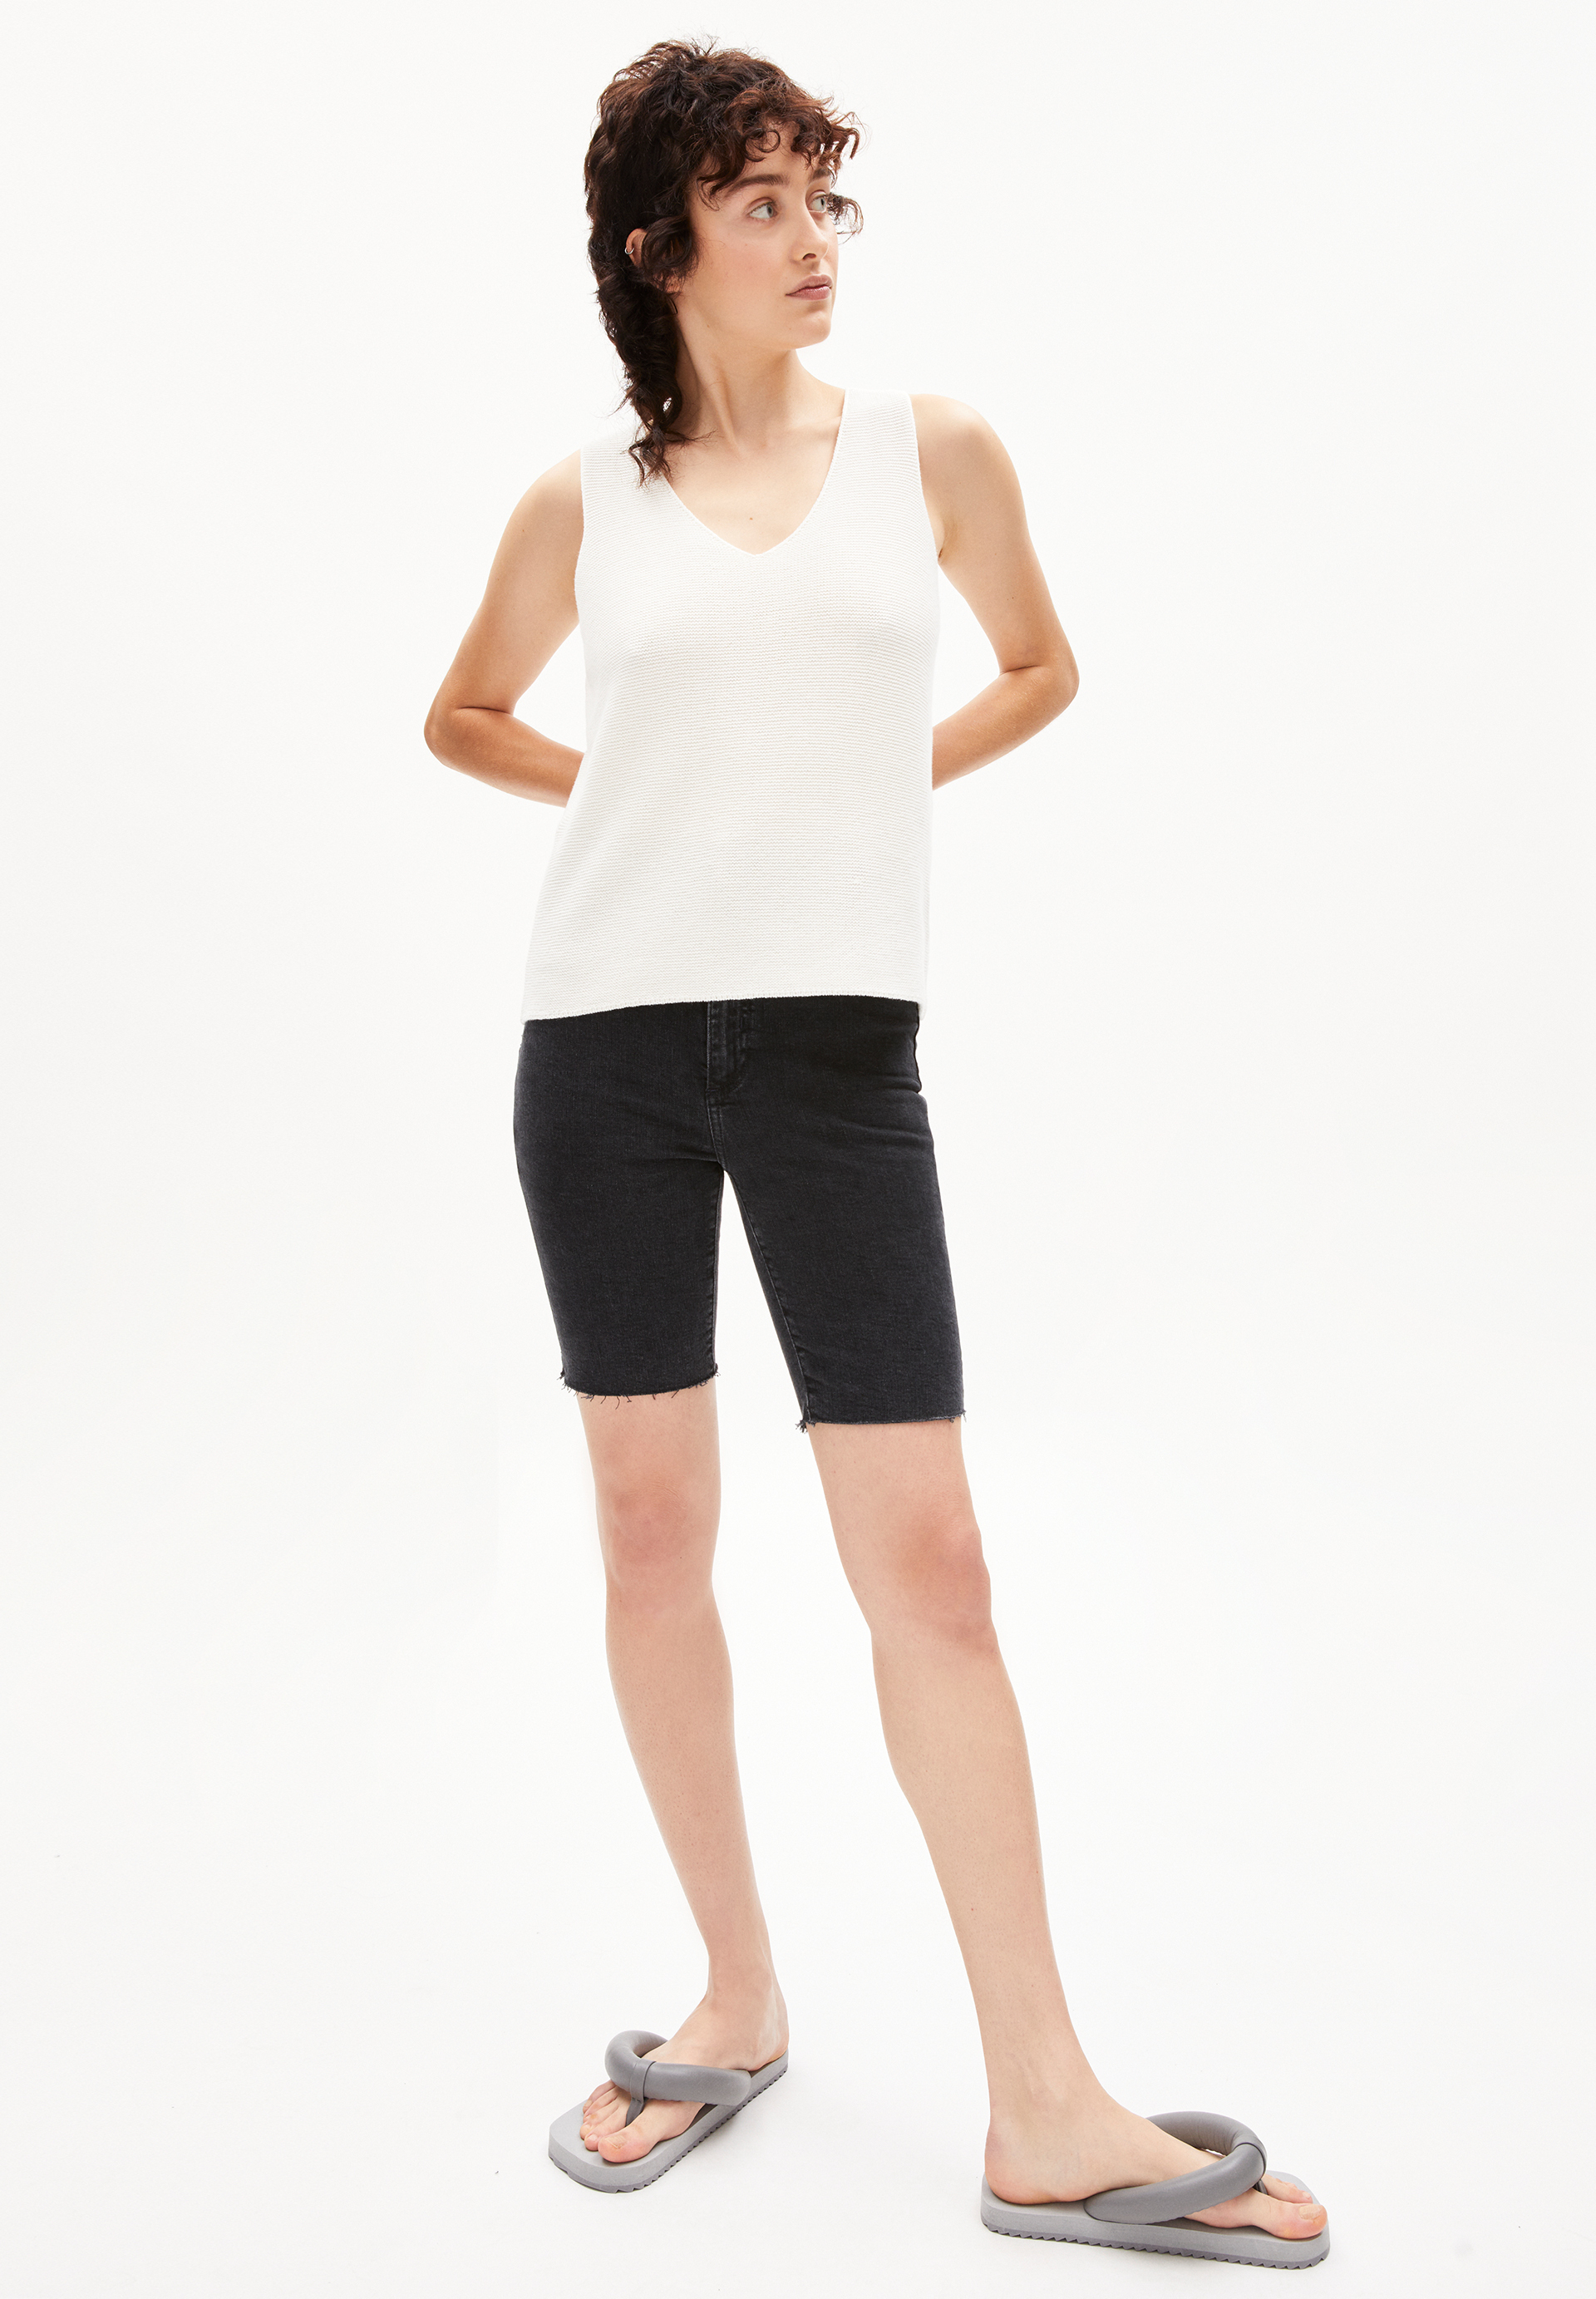 WILMAA Knit Top made of Organic Cotton